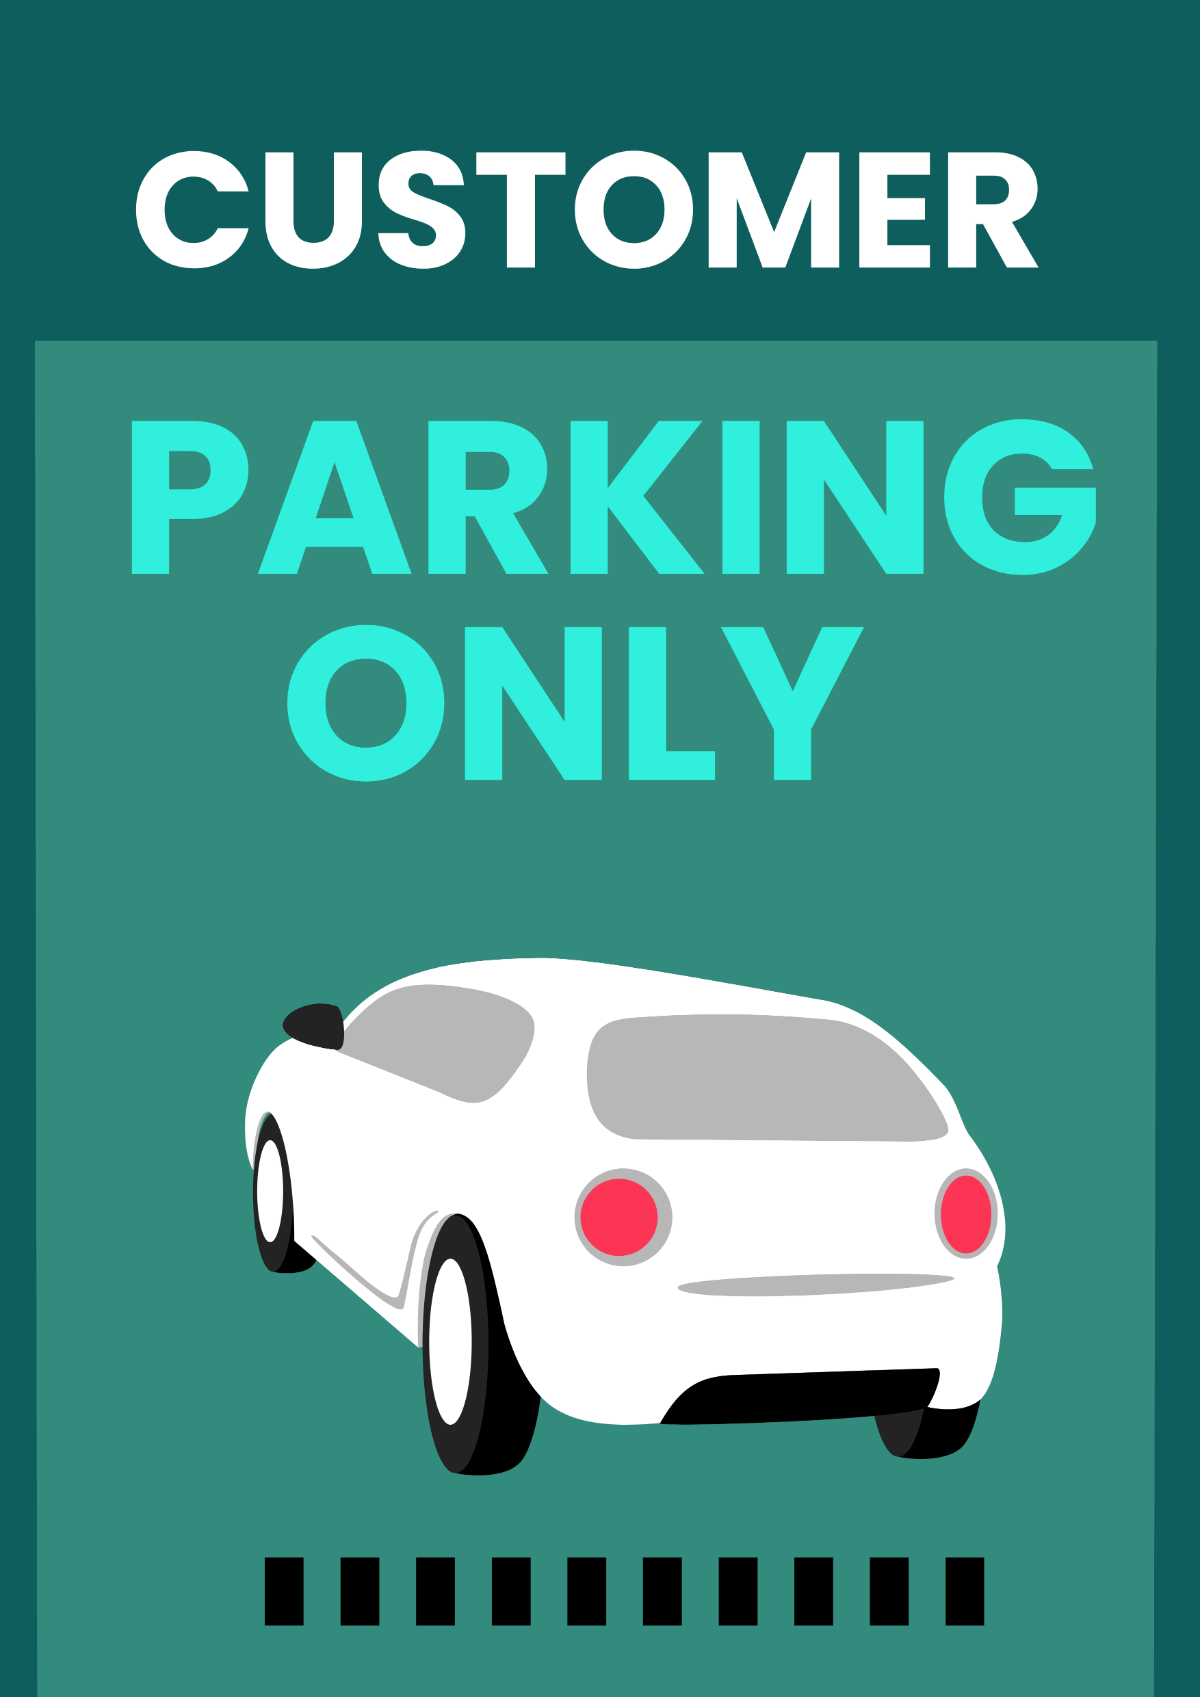 Free Cleaning Services Parking Area Sign Template